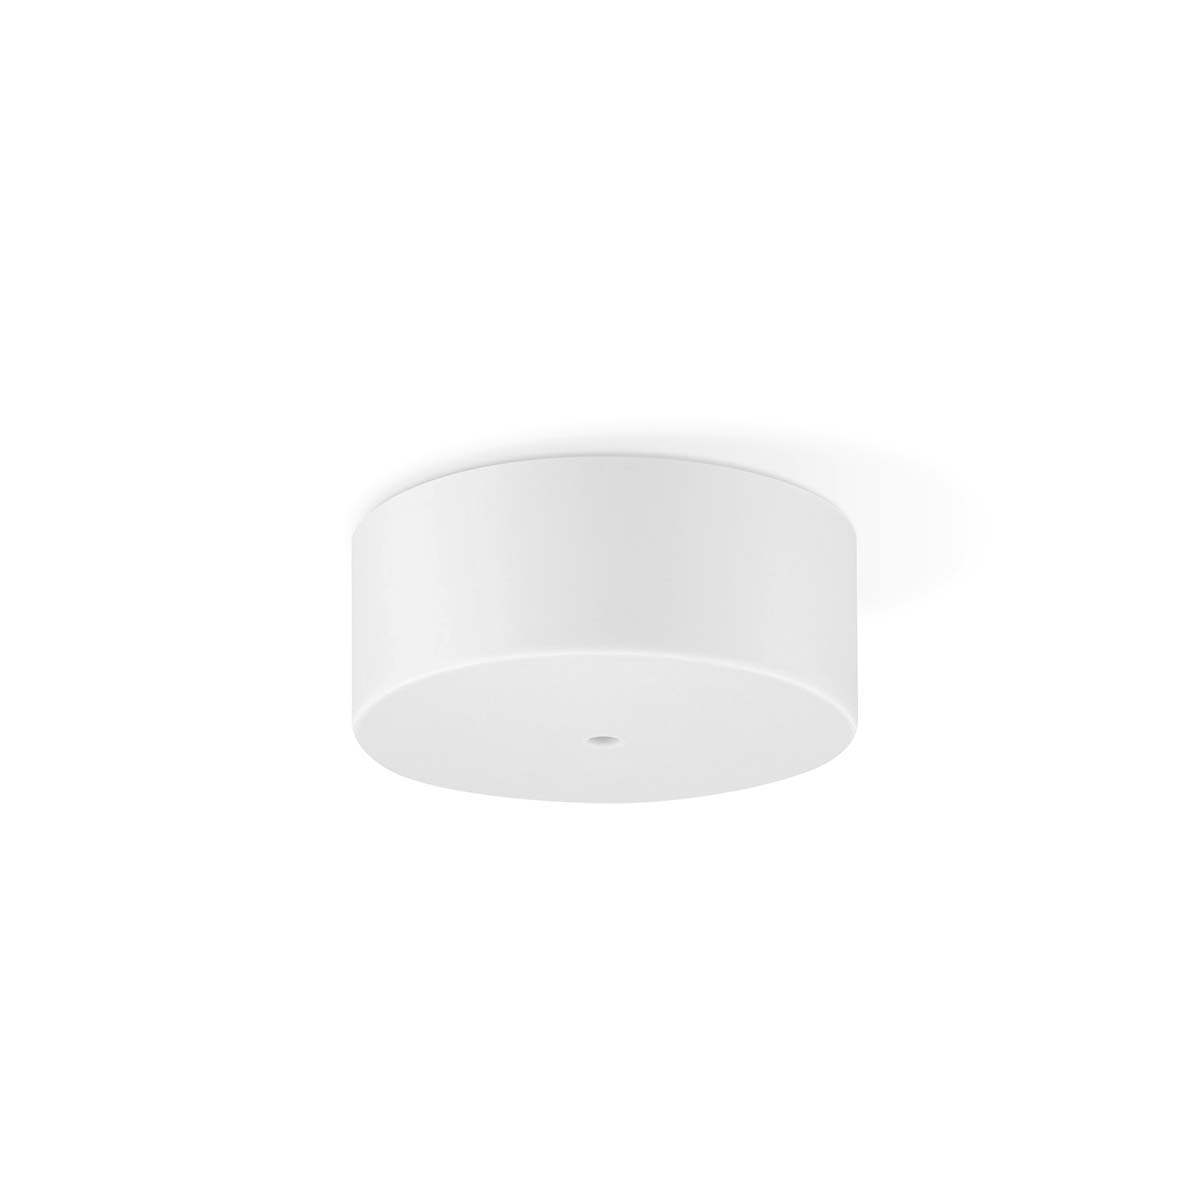 Tangla lighting - TLCP022-01WT - Silicon 1 Light round canopy cylinder - white